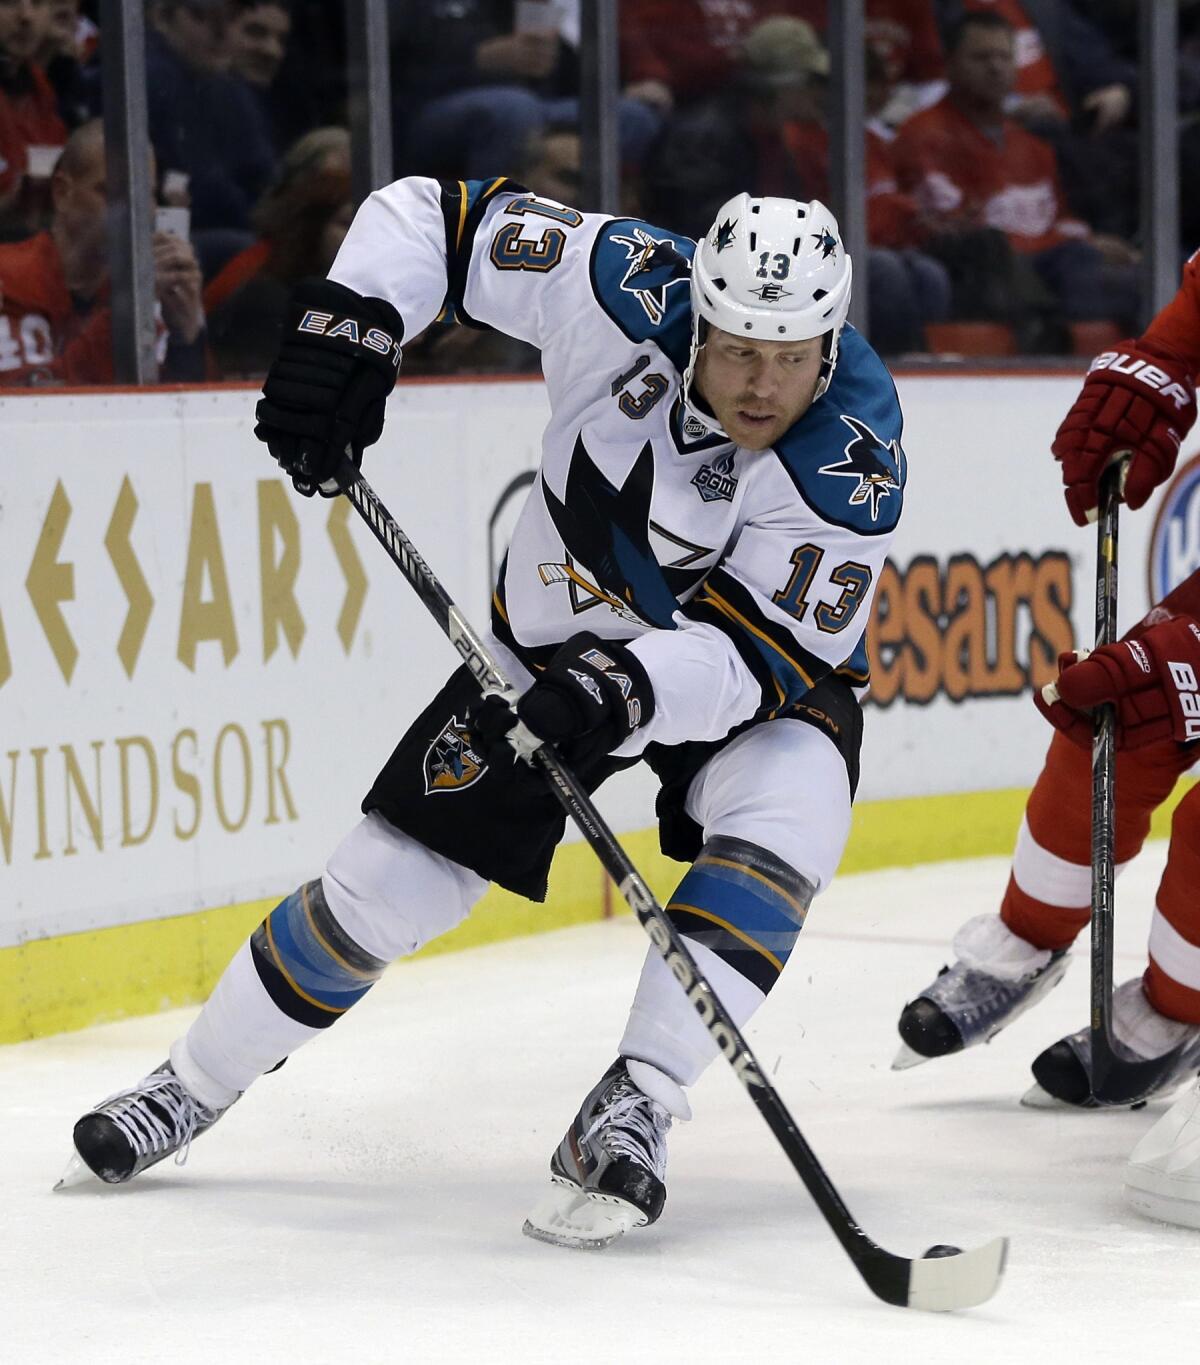 Sam Jose Sharks forward Raffi Torres will miss the start of the season because of a knee injury.